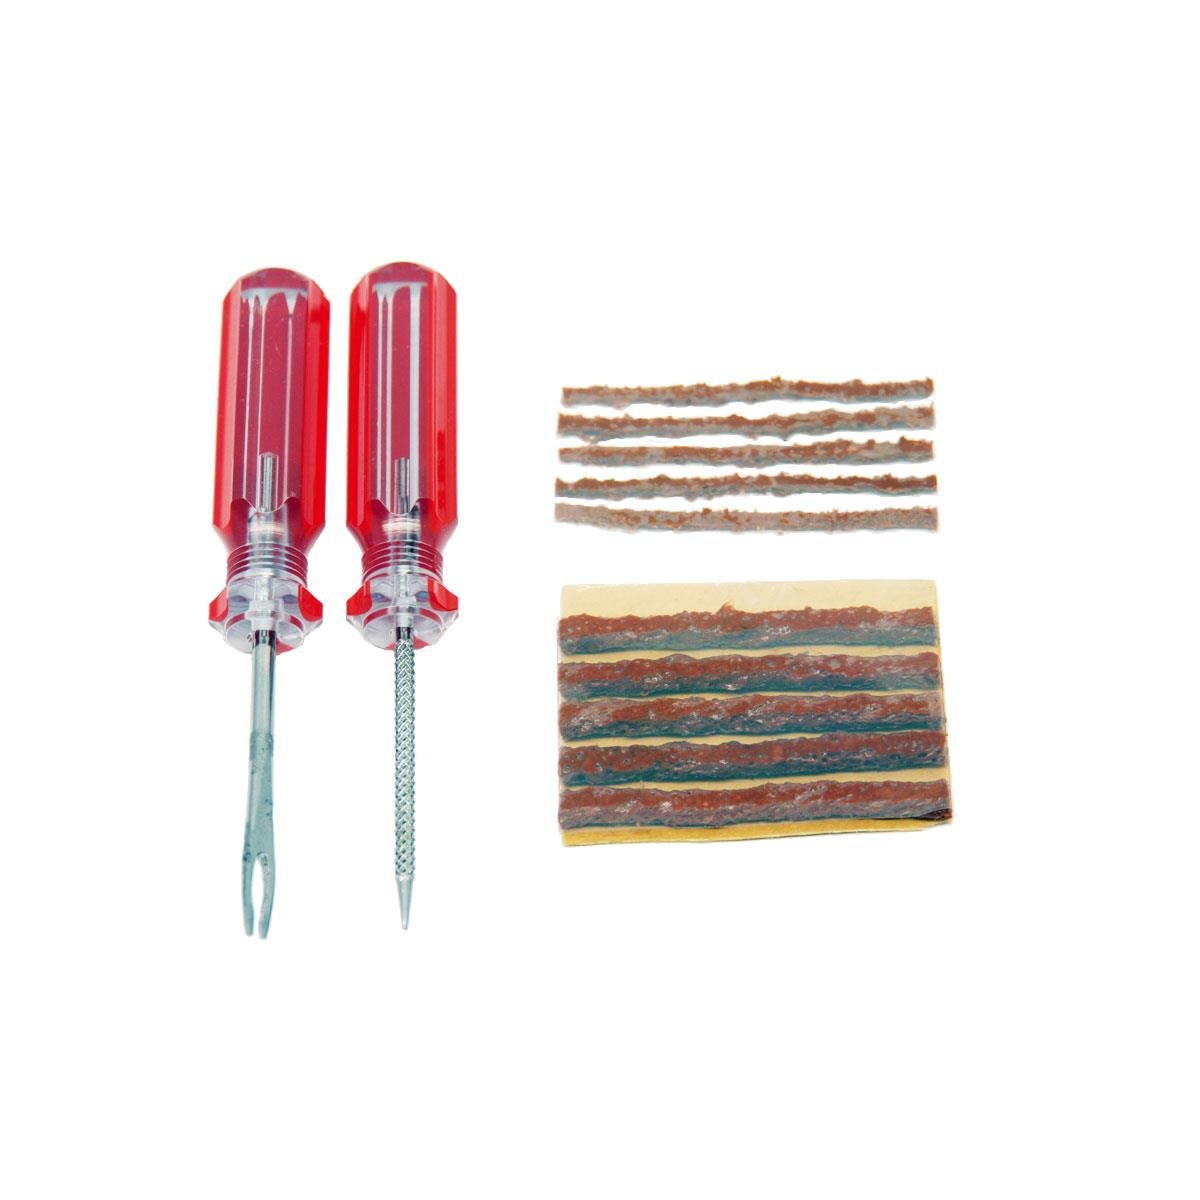 Reverse Components Tubeless Tire Repair Kit  4 pieces